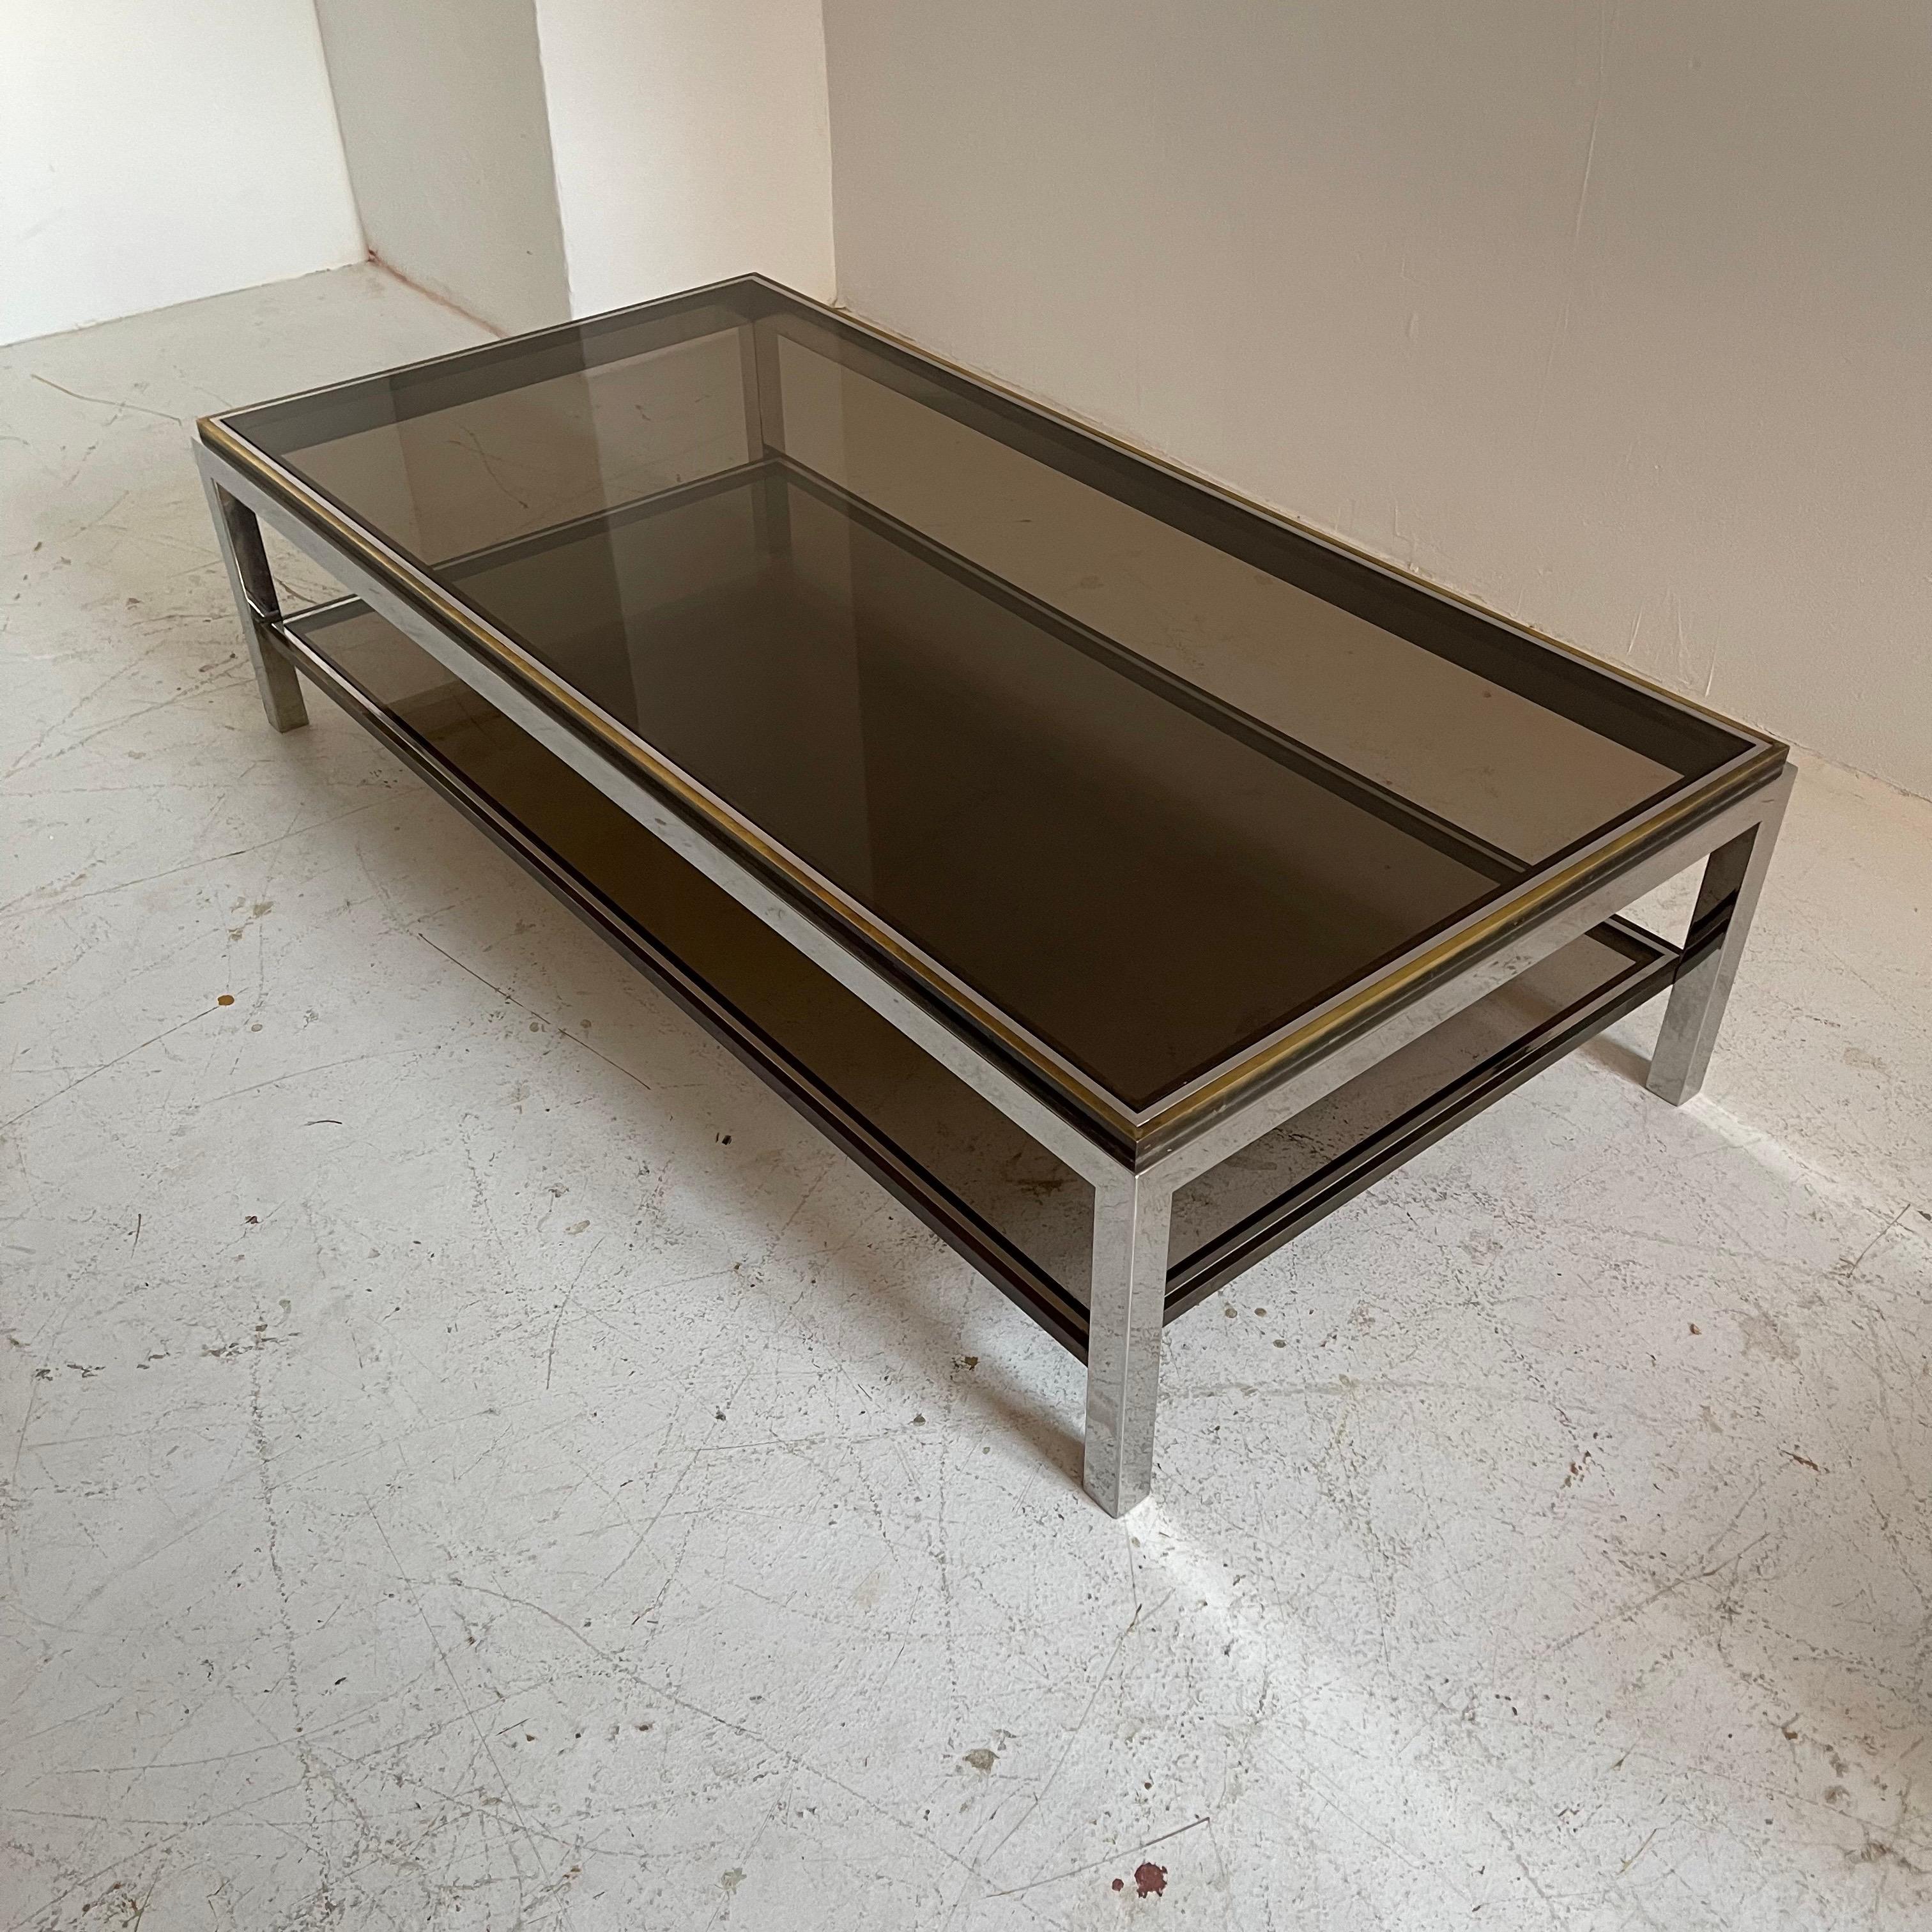 Willy Rizzo impressive large brass coffee tables model 'Flamina', Italy 1974. Signed 'Willy Rizzo'.